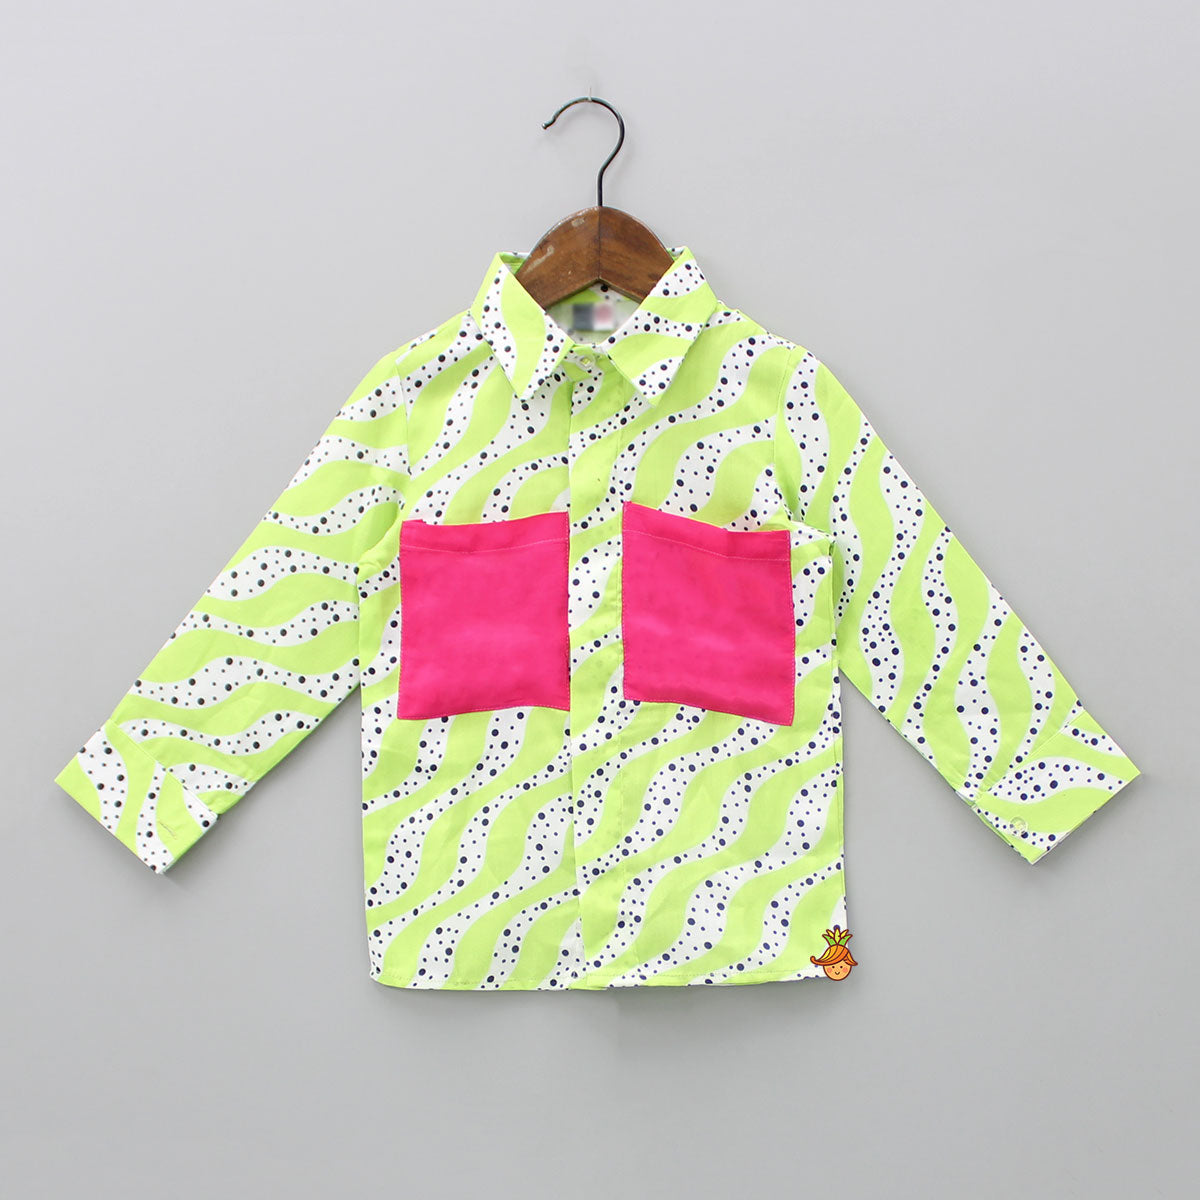 Wavy Dotted Stripes Printed Green Shirt And Pant